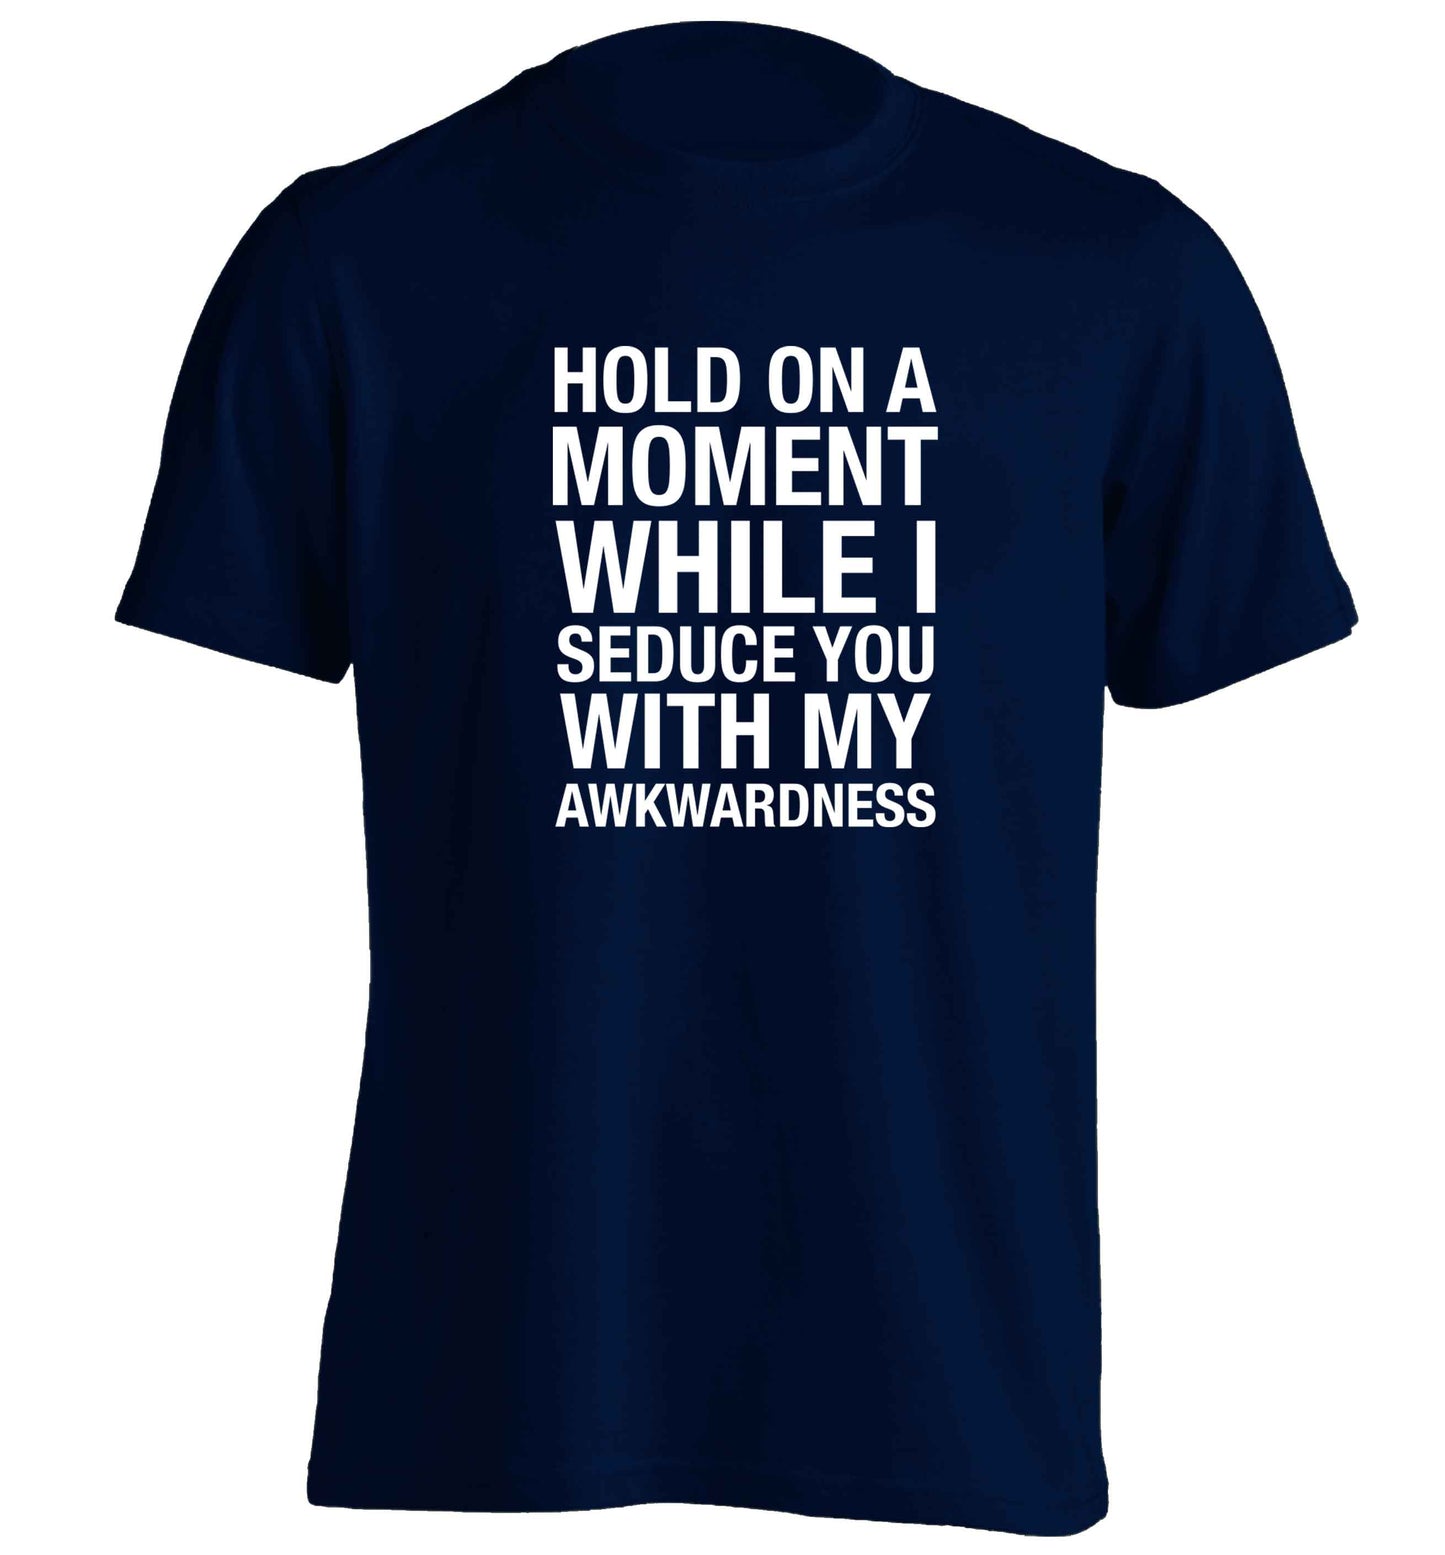 Hold on a moment while I seduce you with my awkwardness adults unisex navy Tshirt 2XL